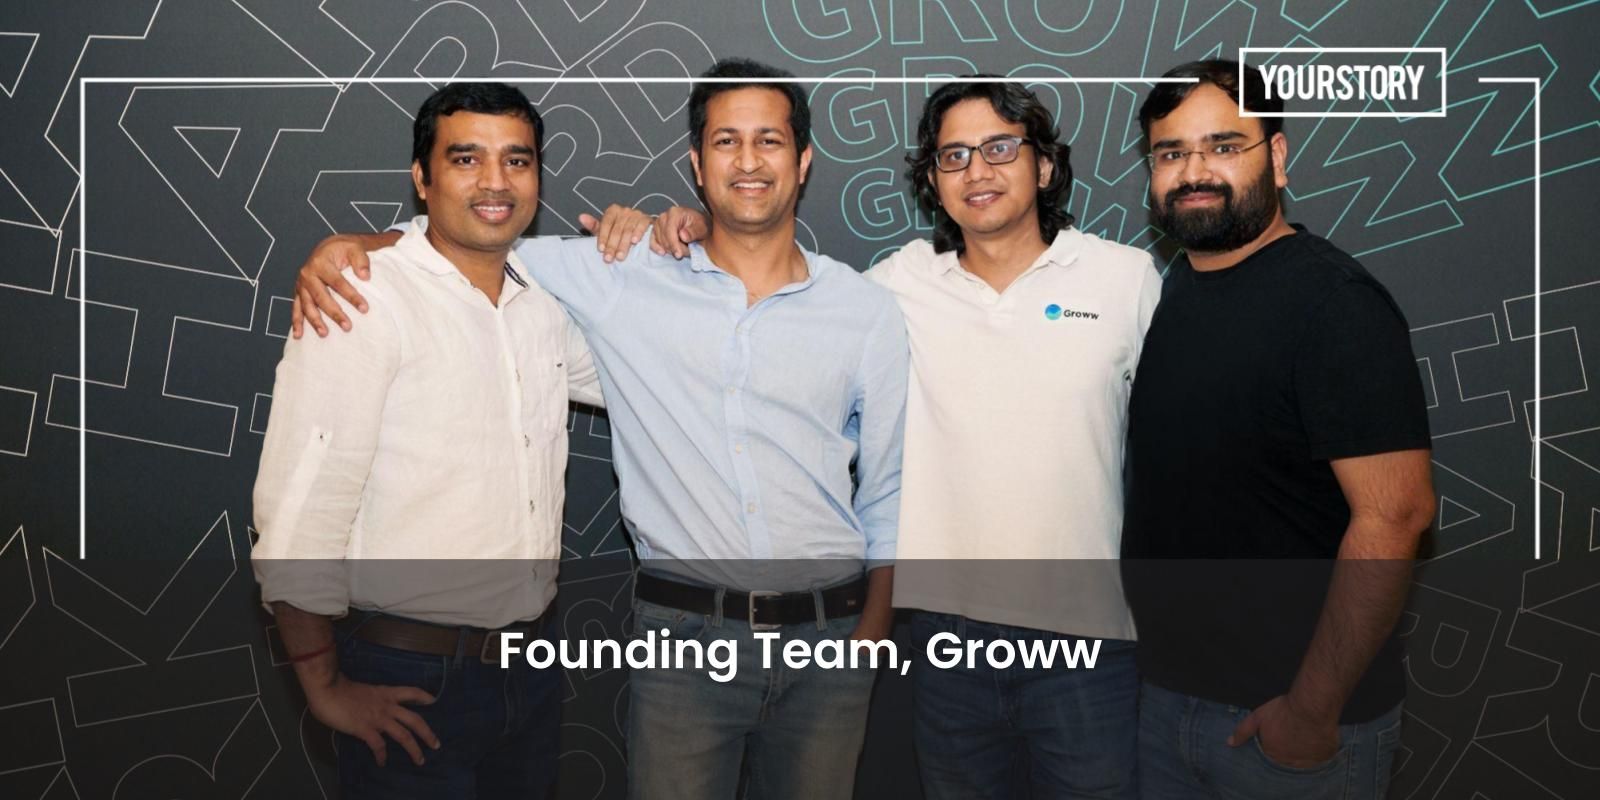 [Funding alert] Investment platform Groww raises $251M in Series E led by Iconiq Growth